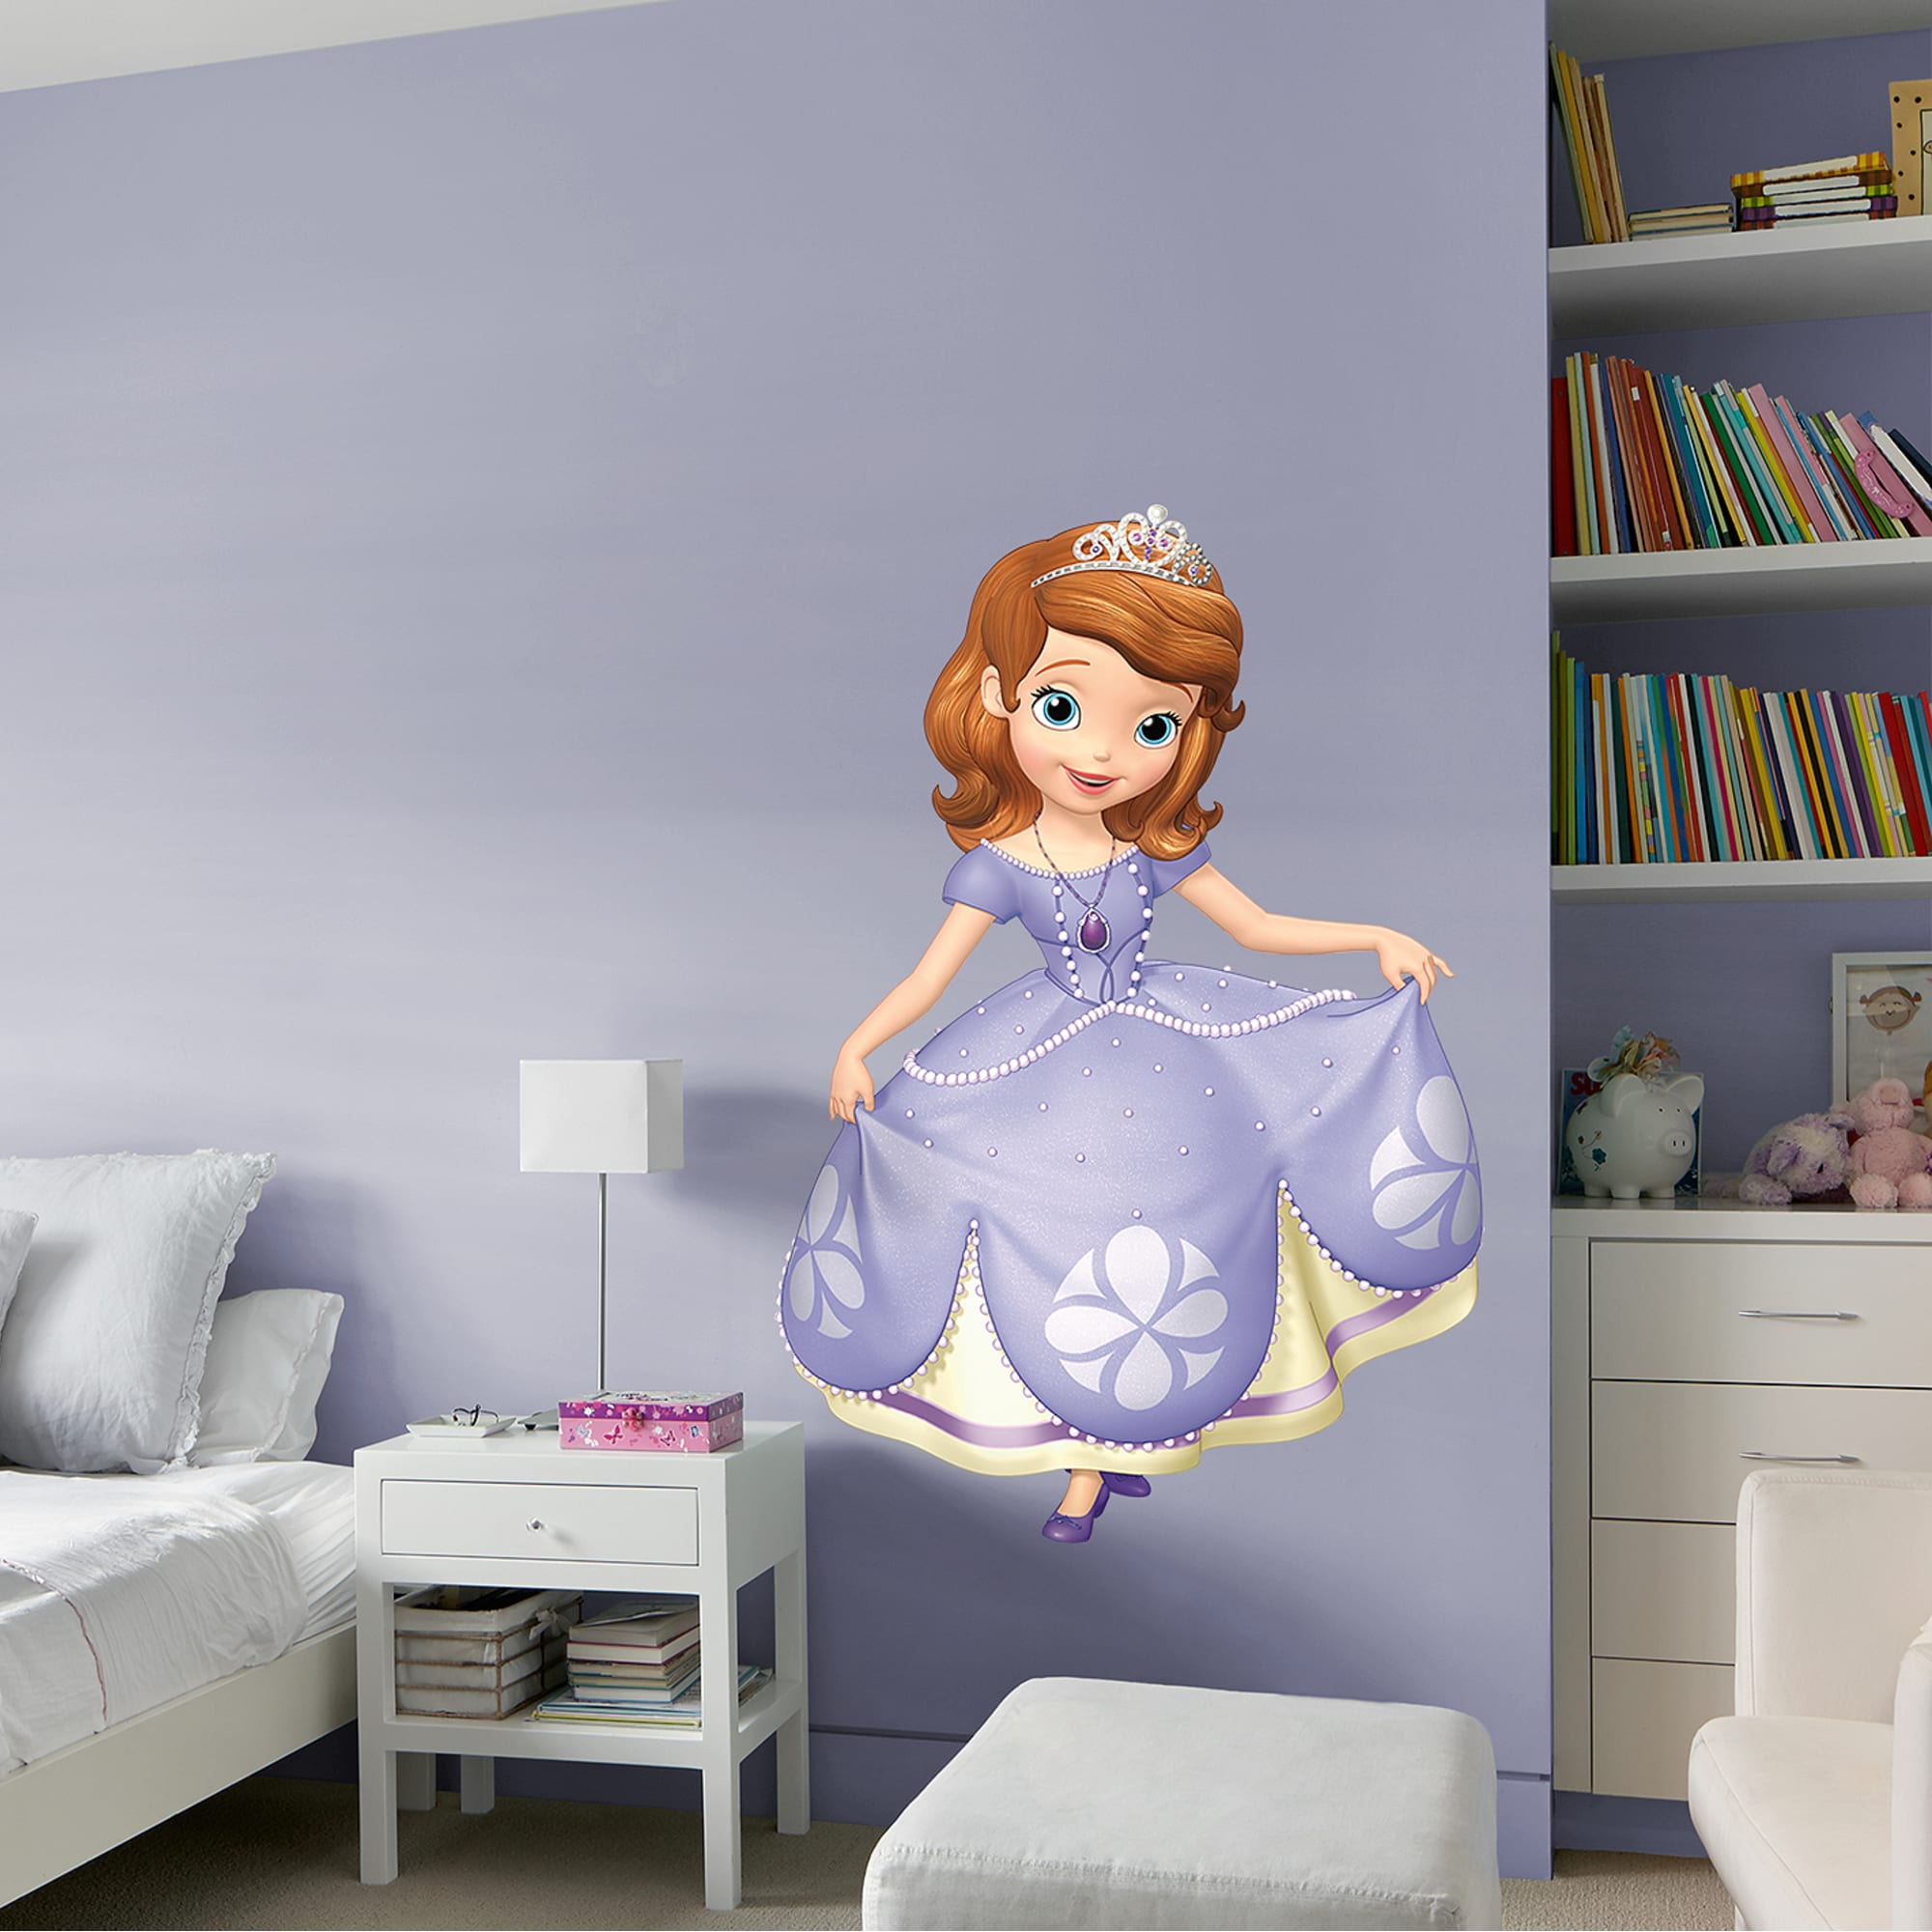 Sofia the First - Officially Licensed Disney Removable Wall Decal 33.0"W x 49.0"H by Fathead | Vinyl